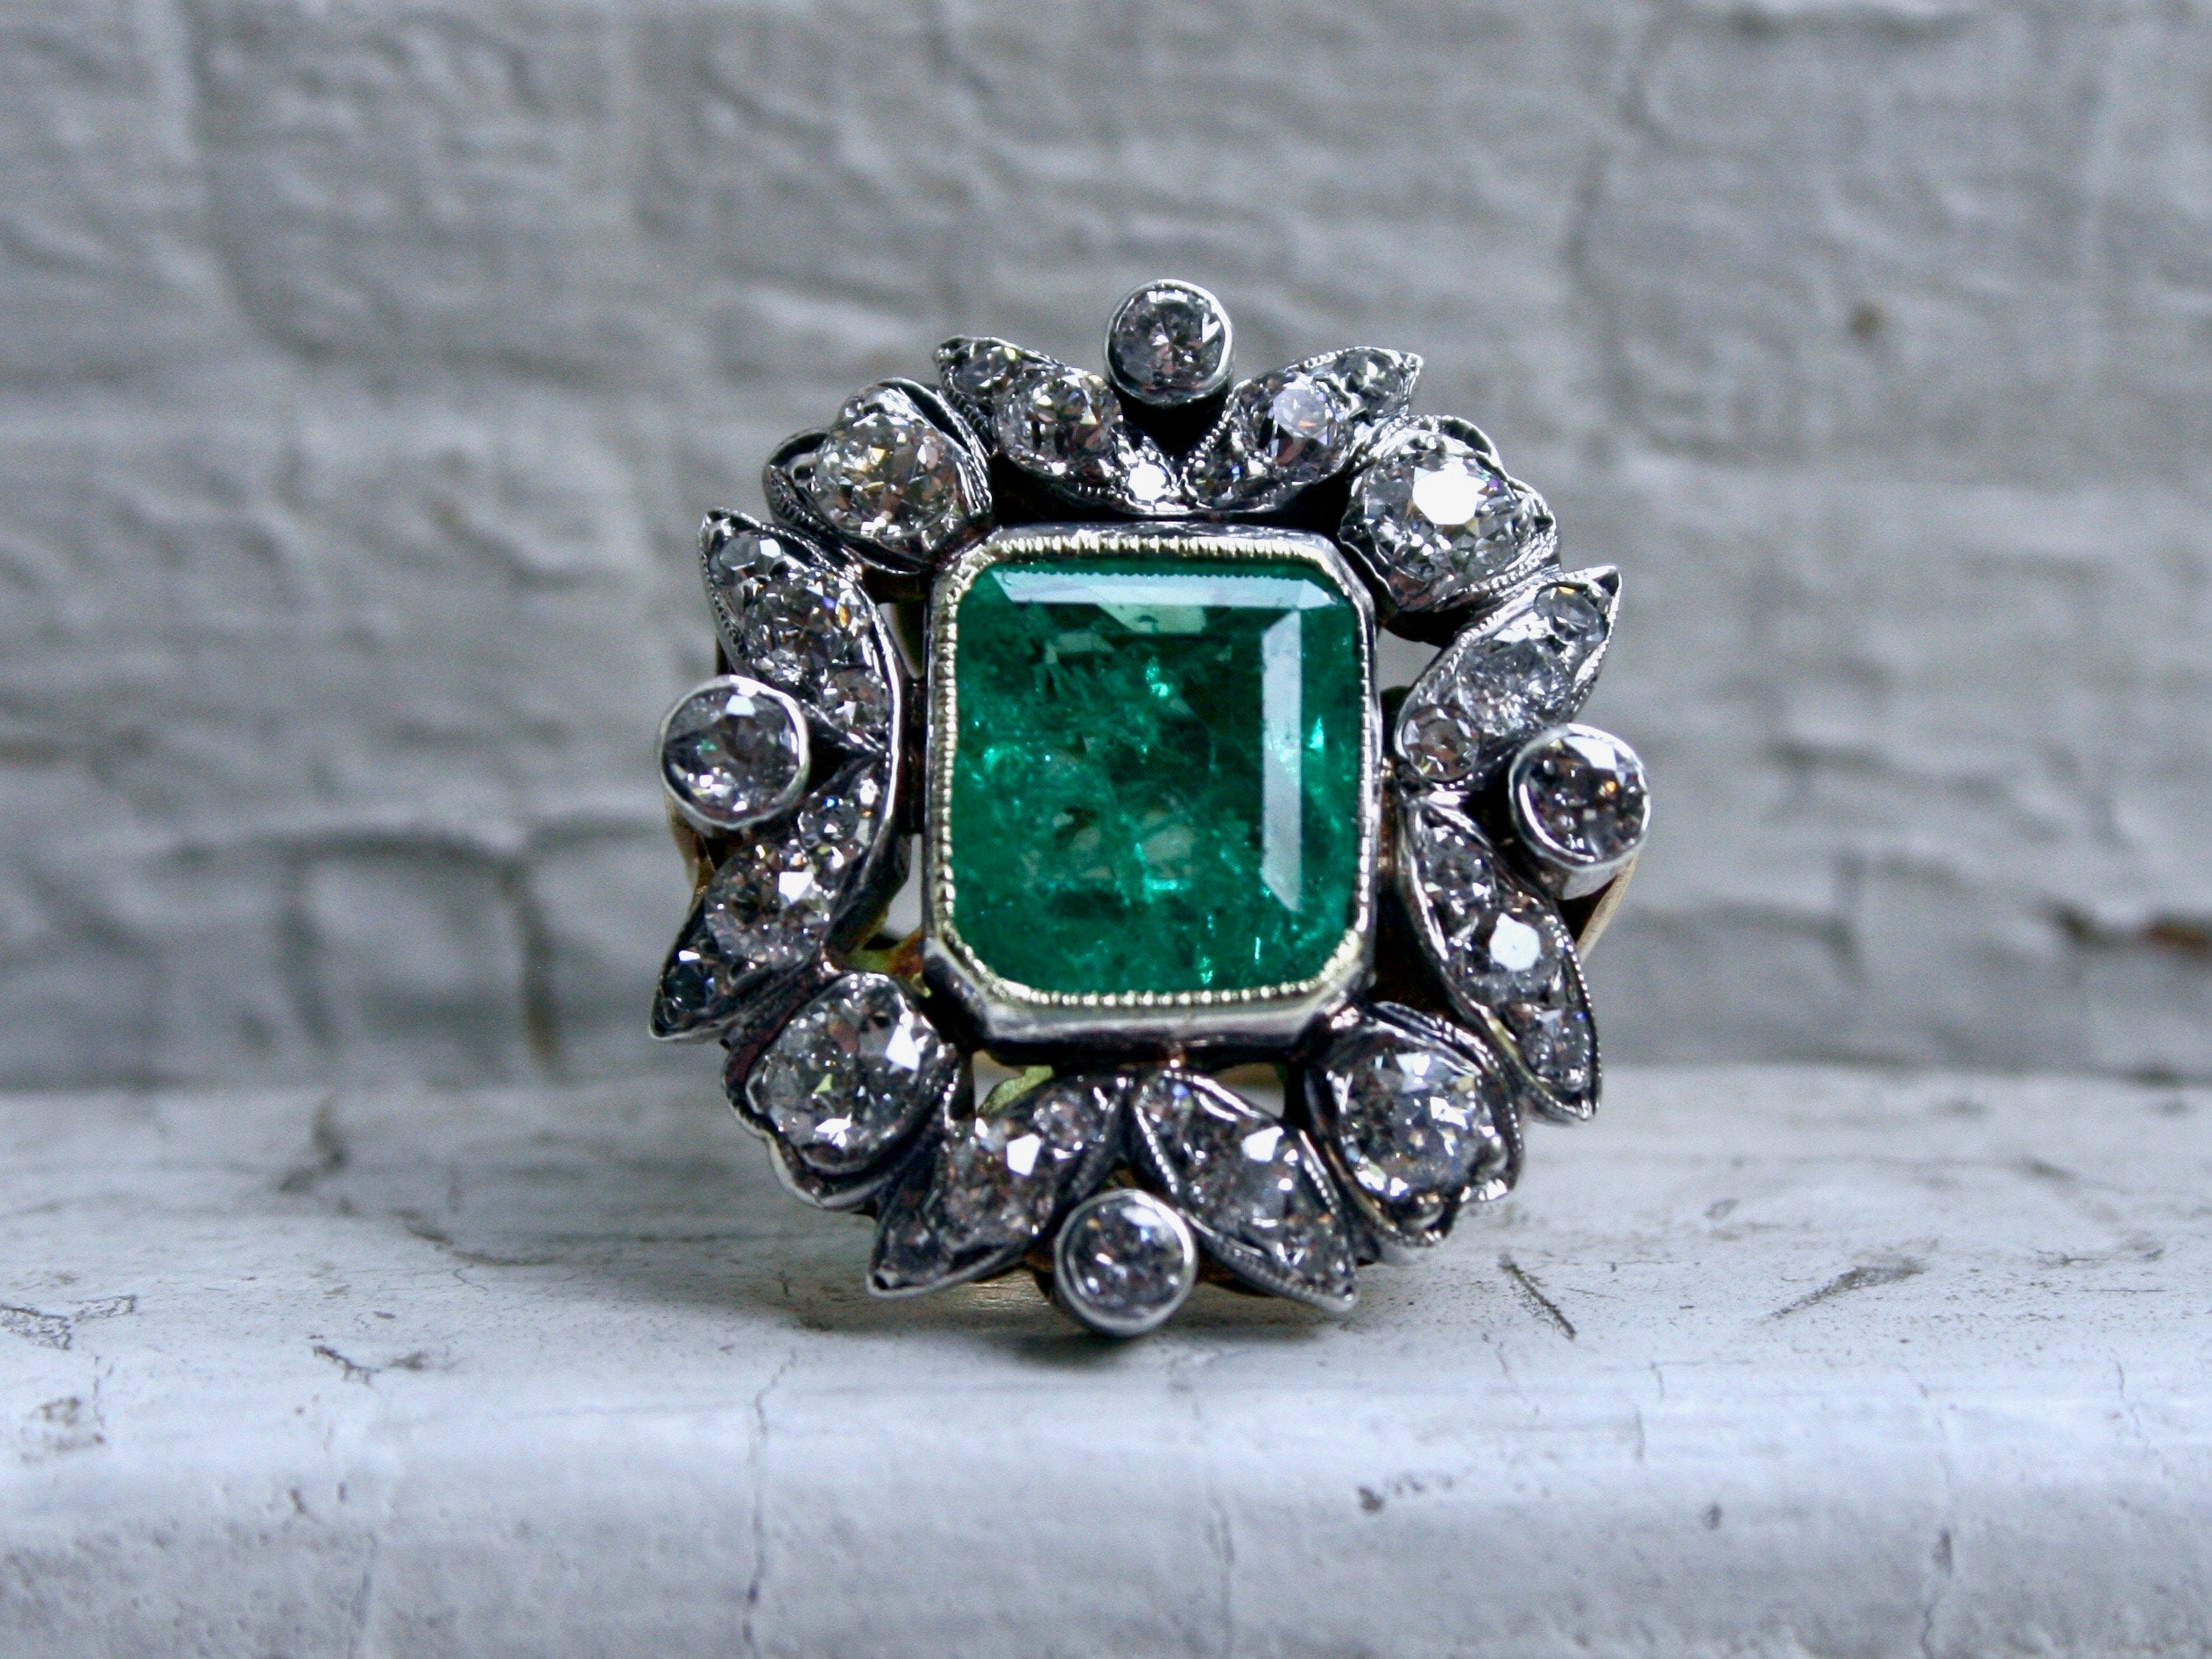 Stunning Victorian Antique 18K Yellow Gold/ Silver Diamond and Emerald Ring - 6.60ct.